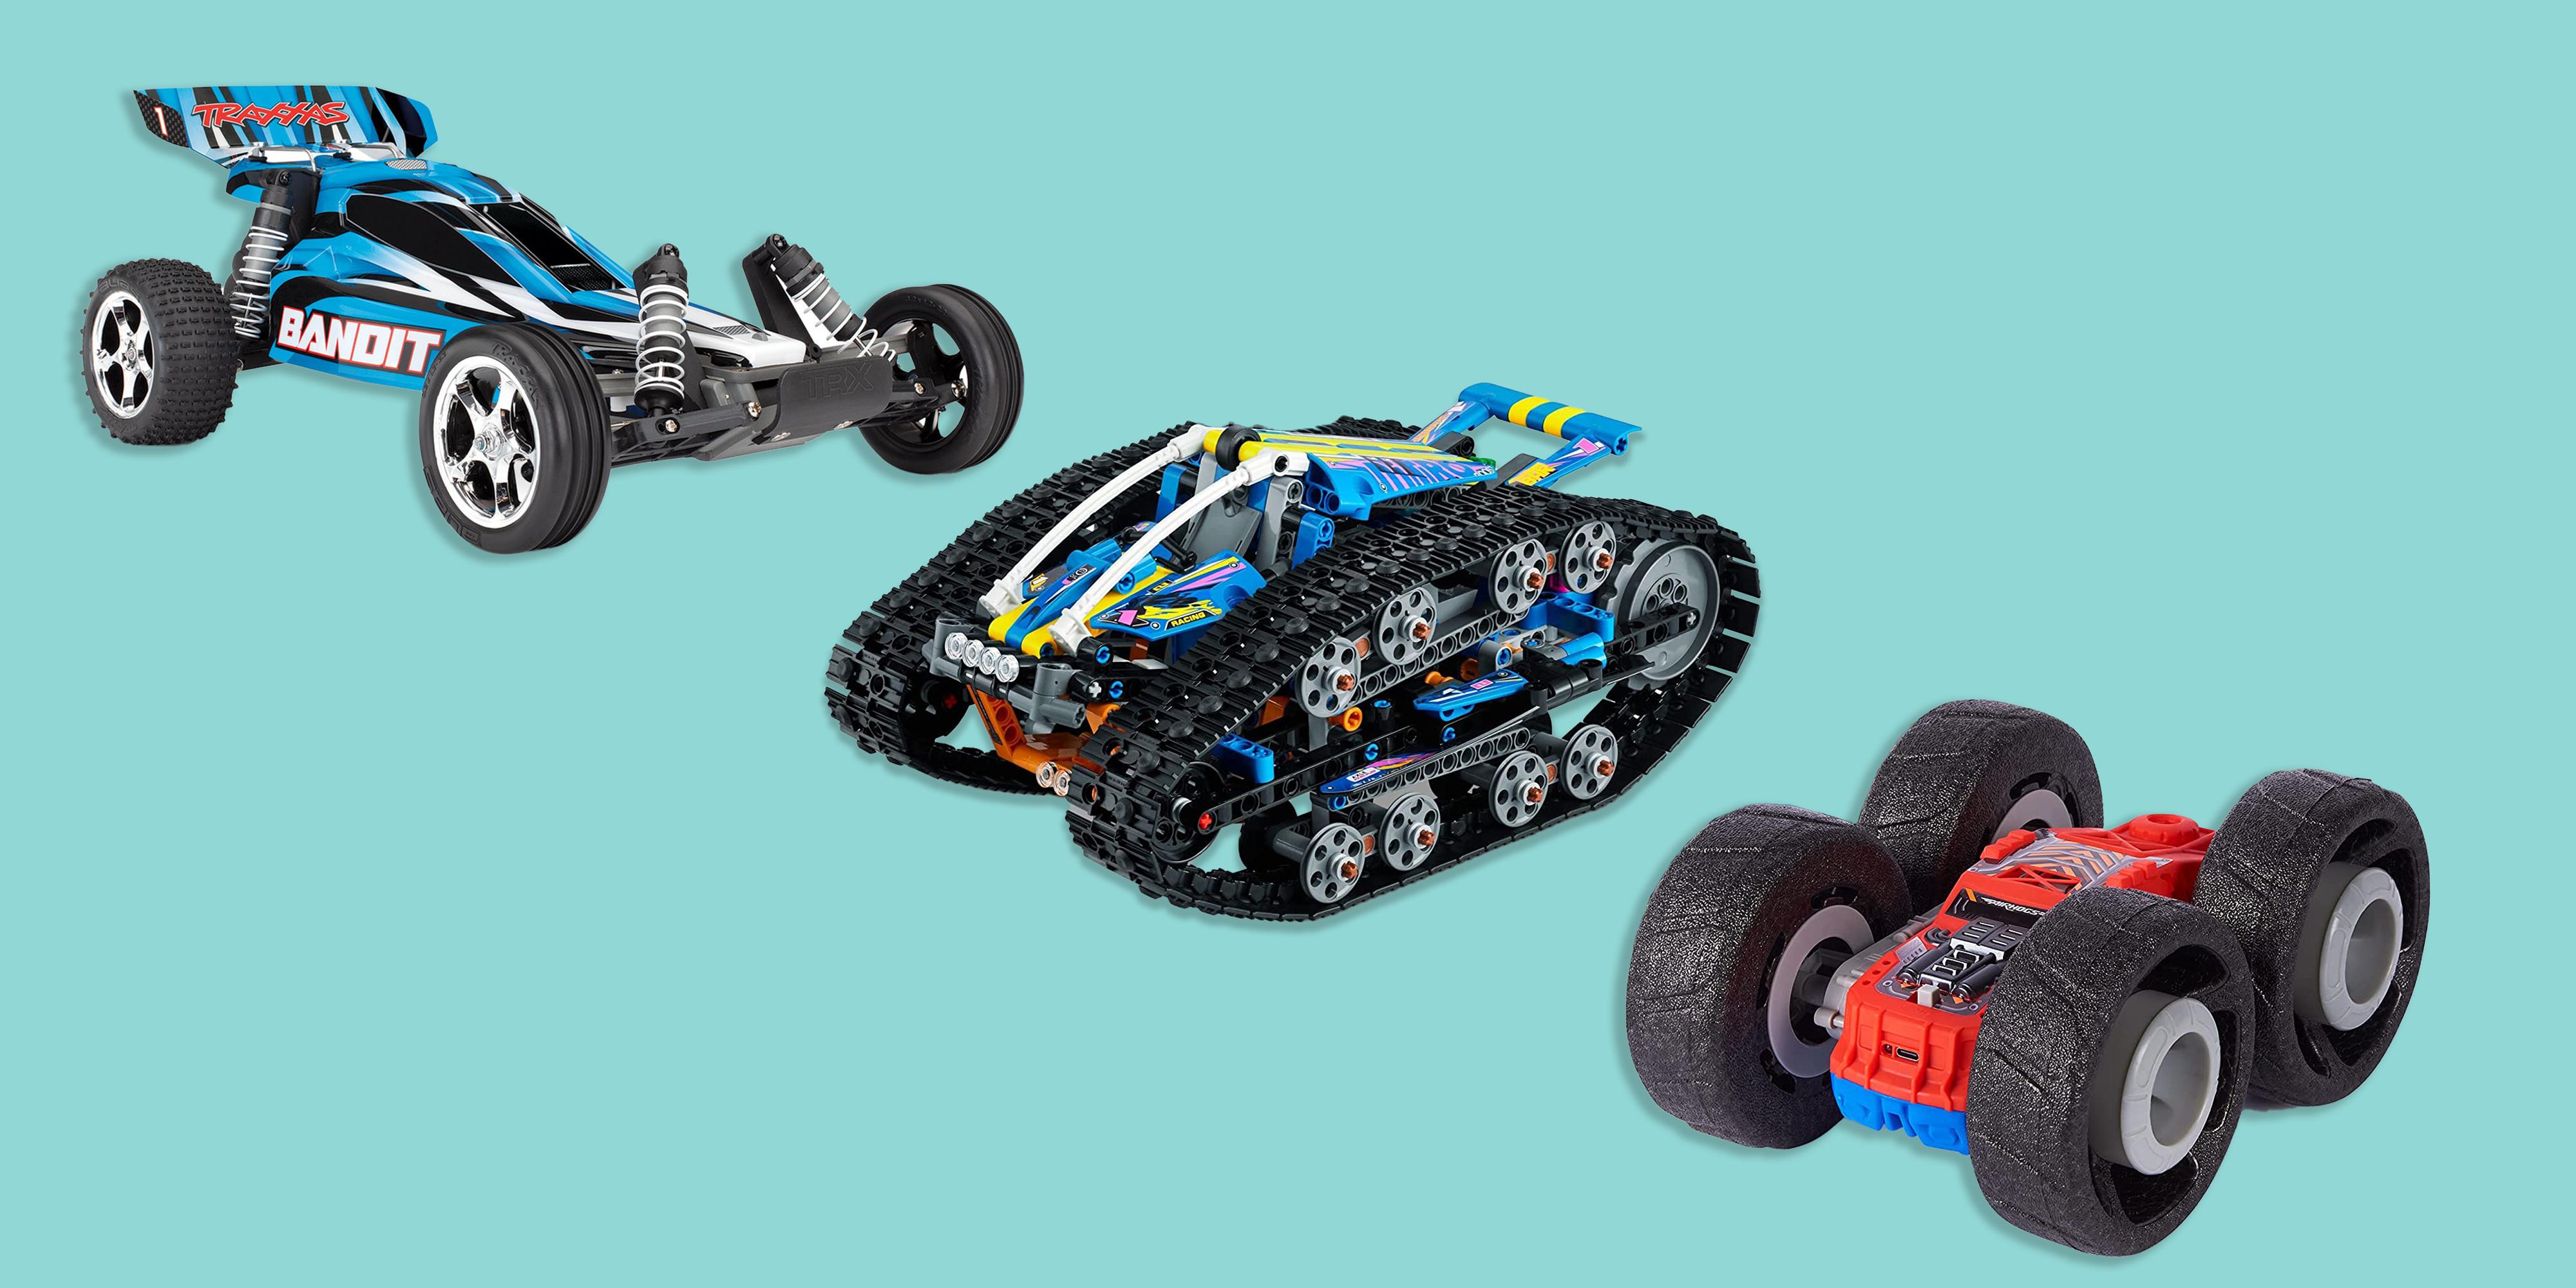 The Best Rc Car: Choose the perfect RC car with these helpful tips